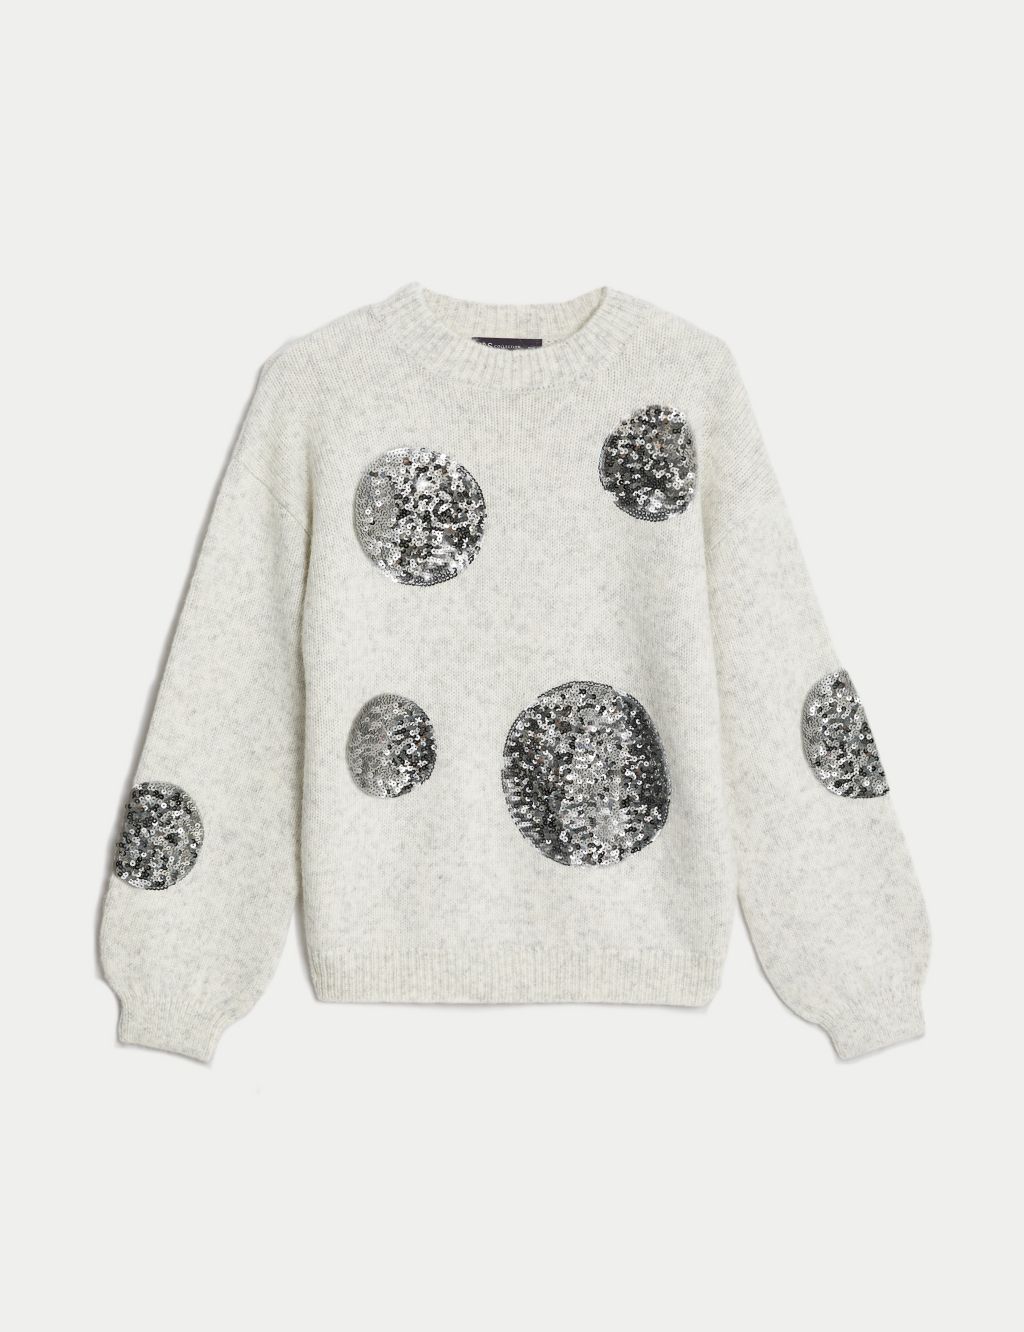 Recycled Blend Sequin Spot Print Jumper image 2